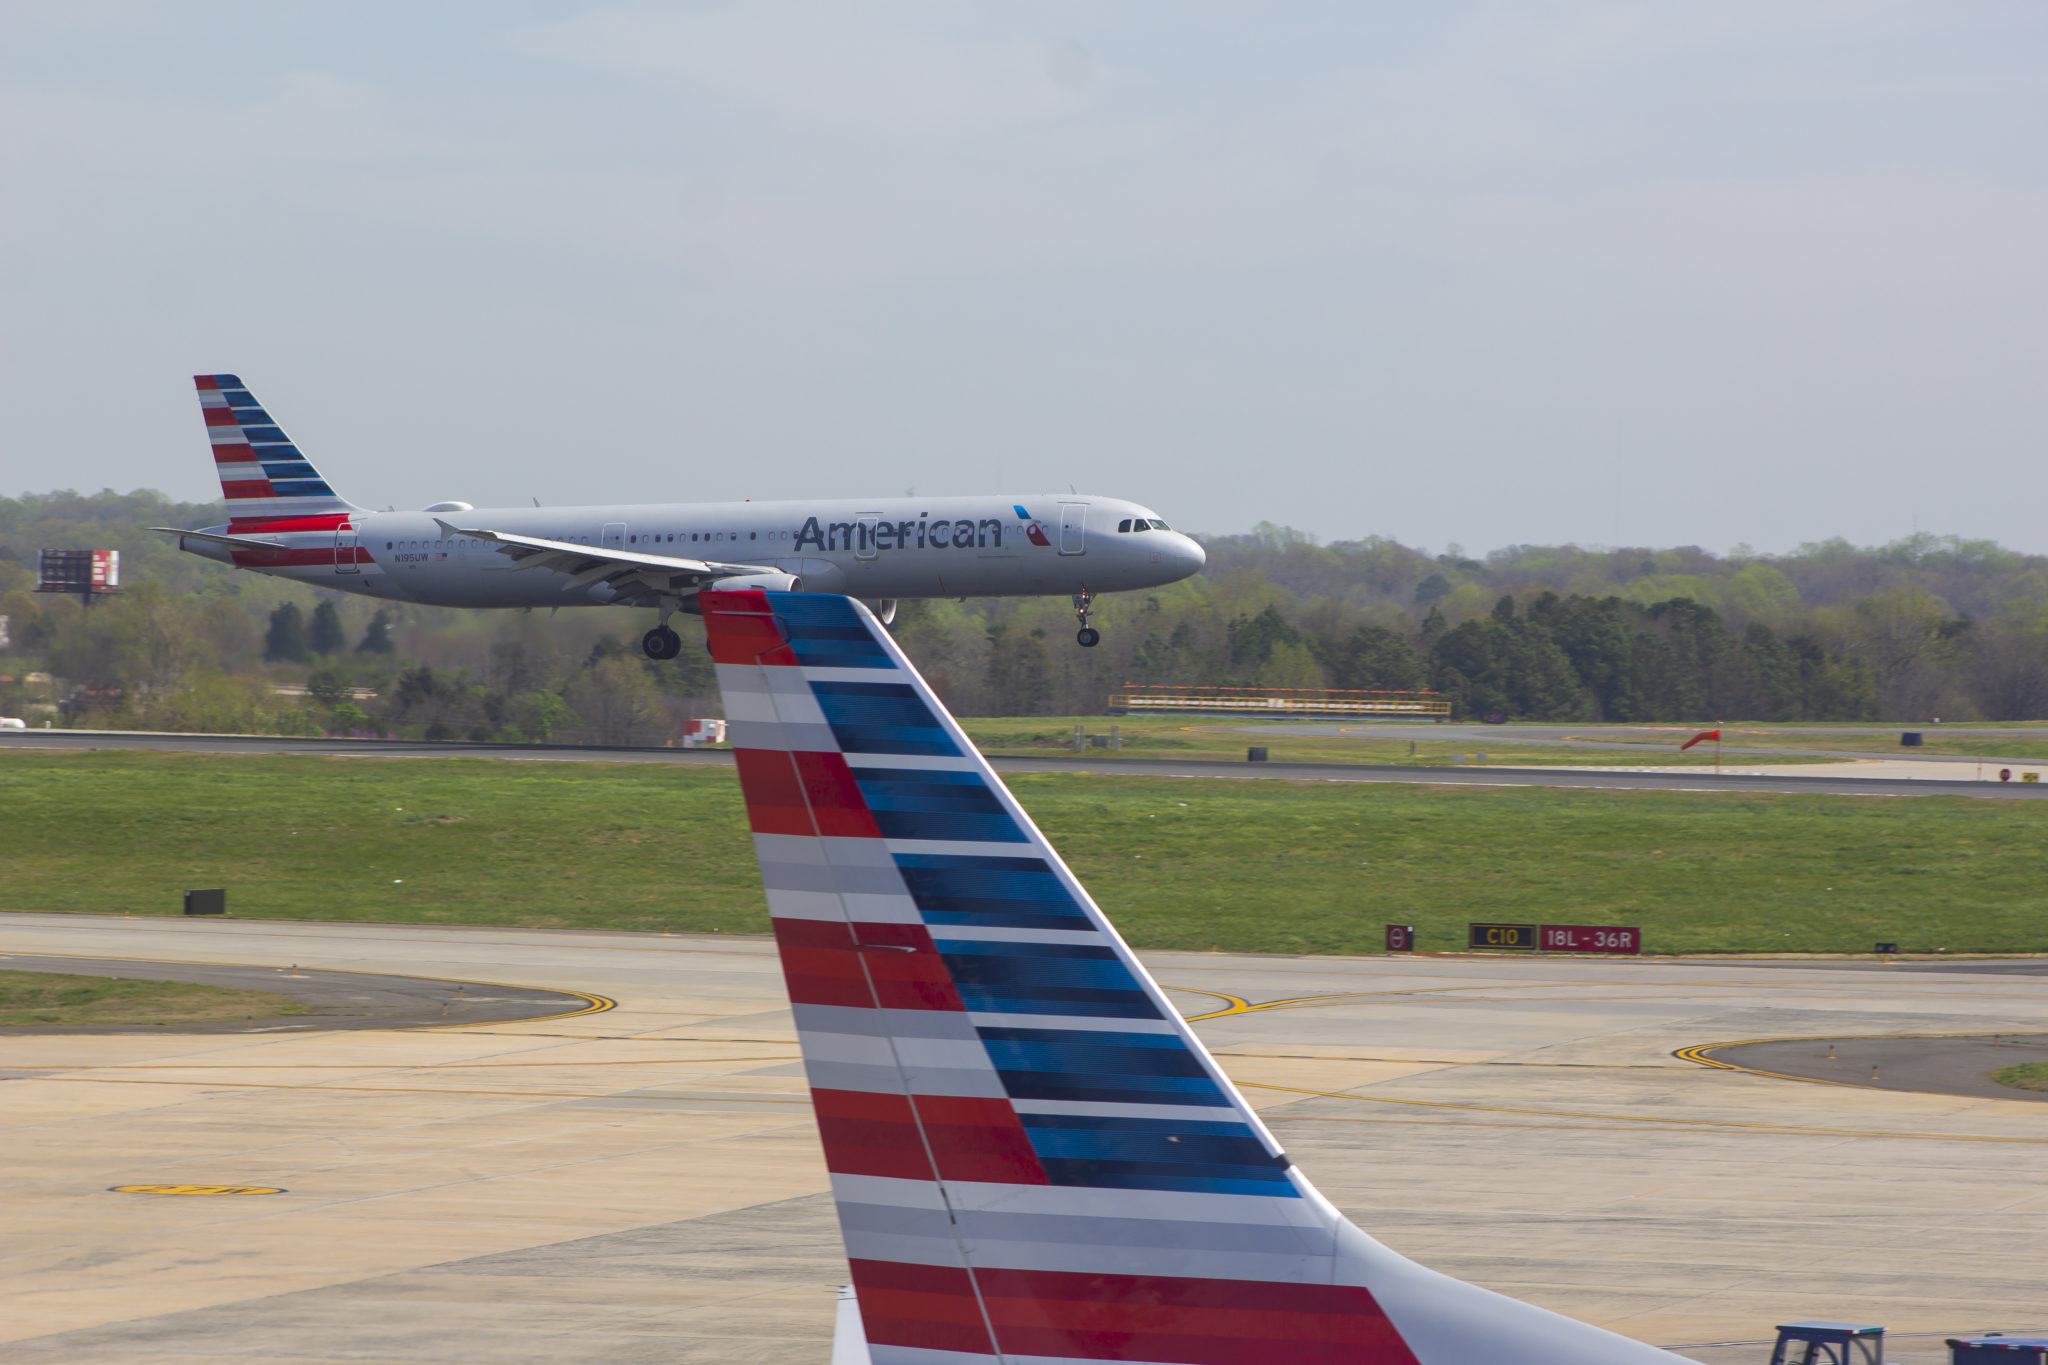 American Airlines aircraft seen at airport